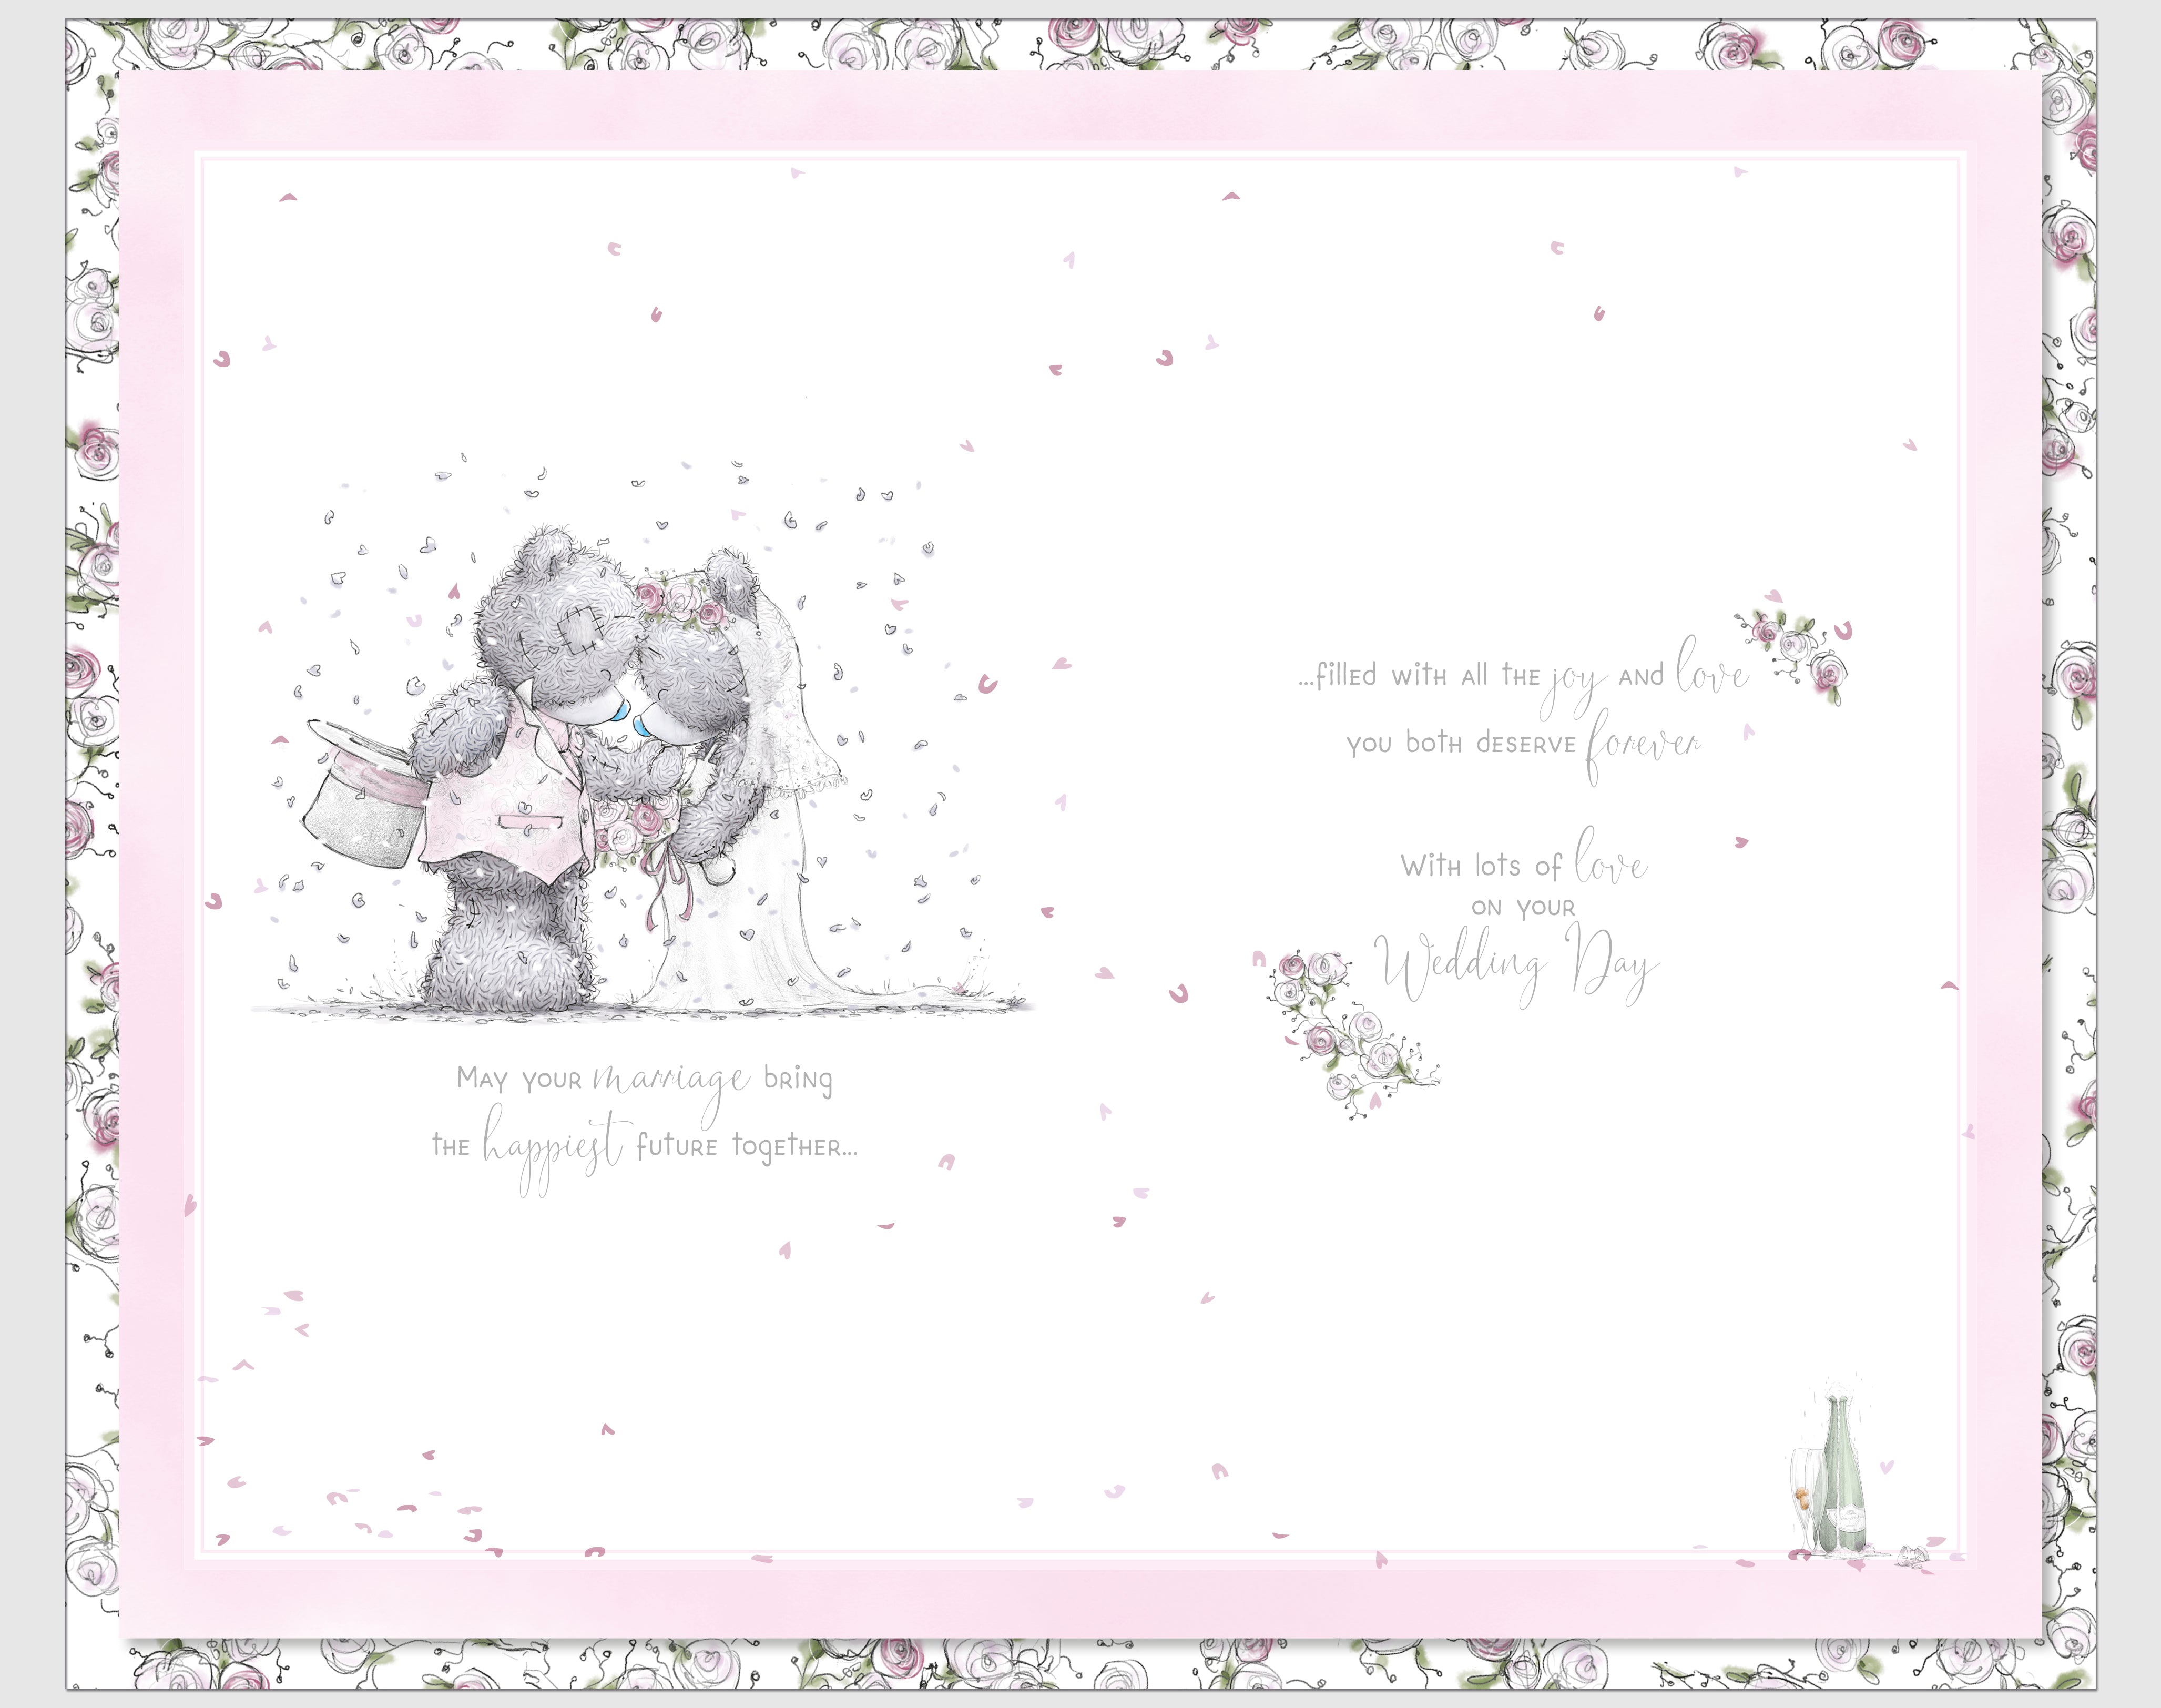 Wedding Day Card - Special Couple Bear Bride And Groom